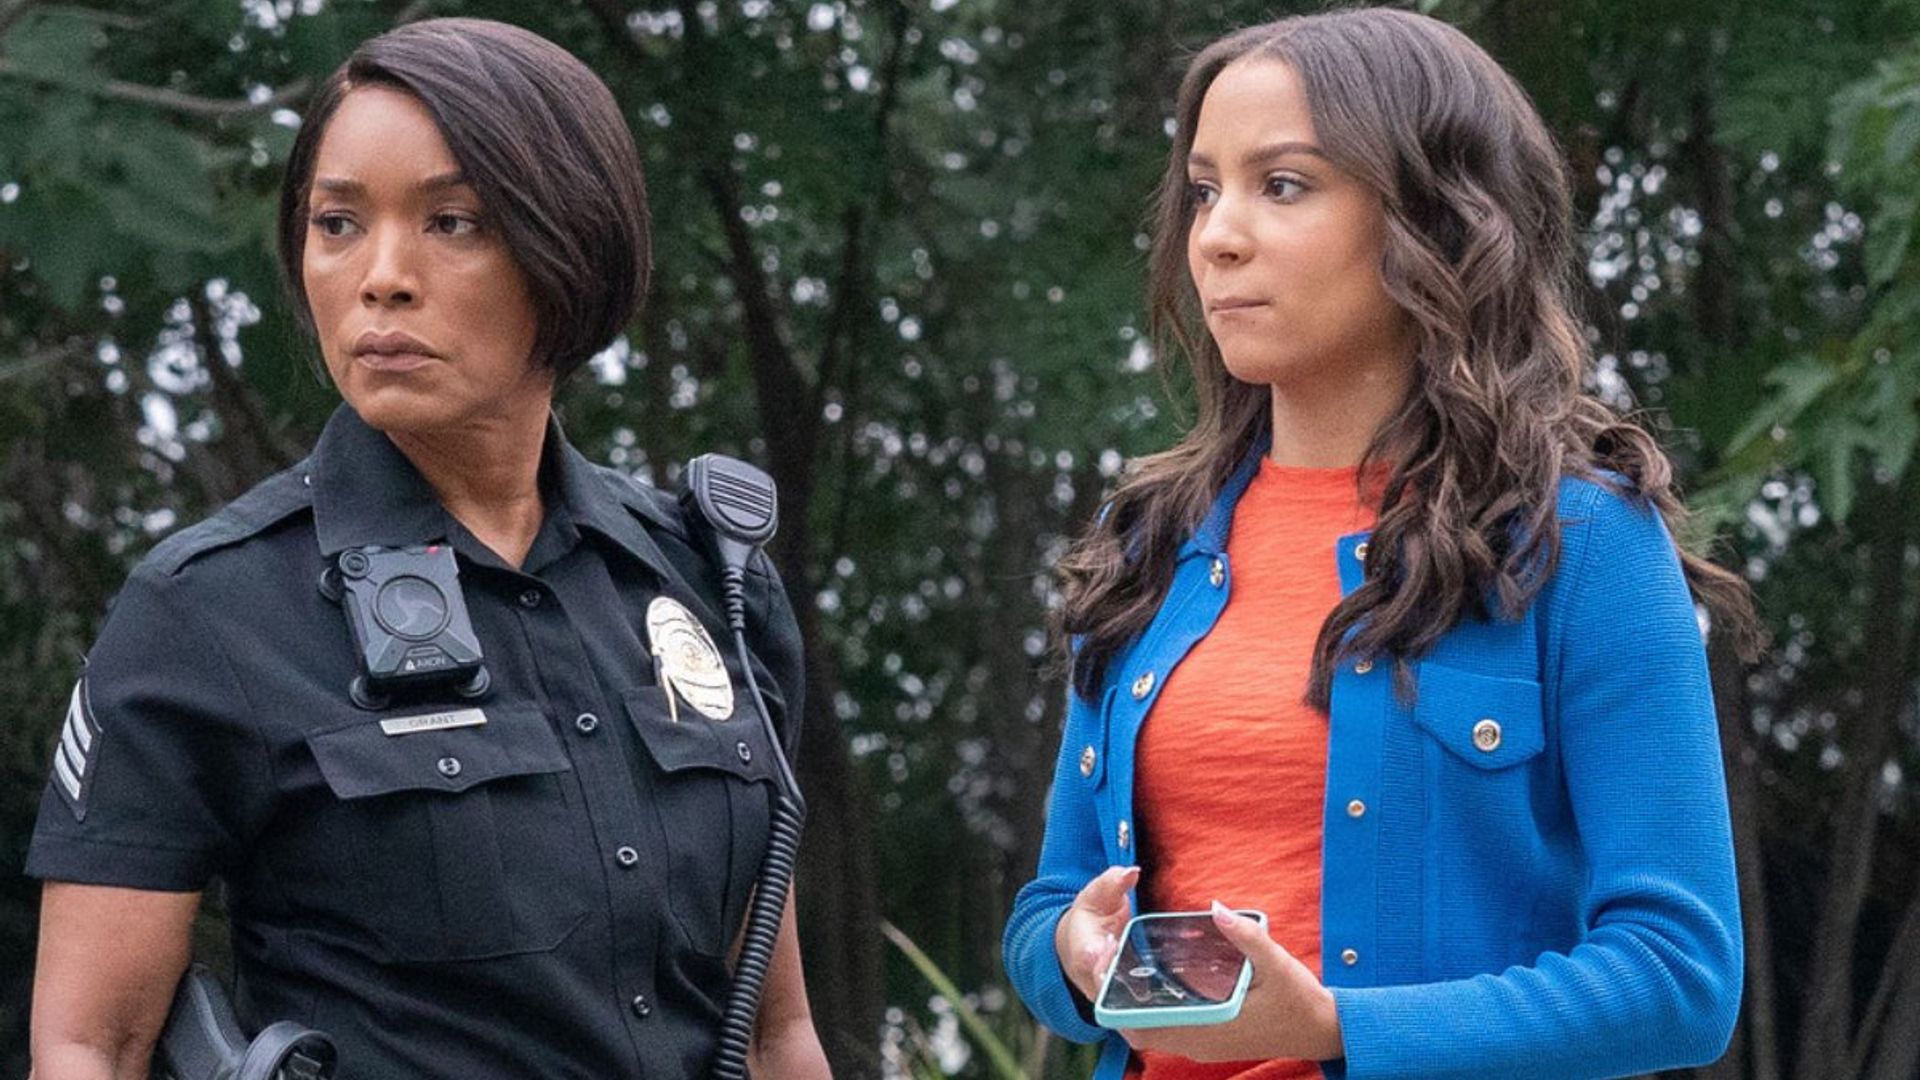 Exclusive: 9-1-1 star Corinne Massiah details 'intense' episode and relationship with Angela Bassett